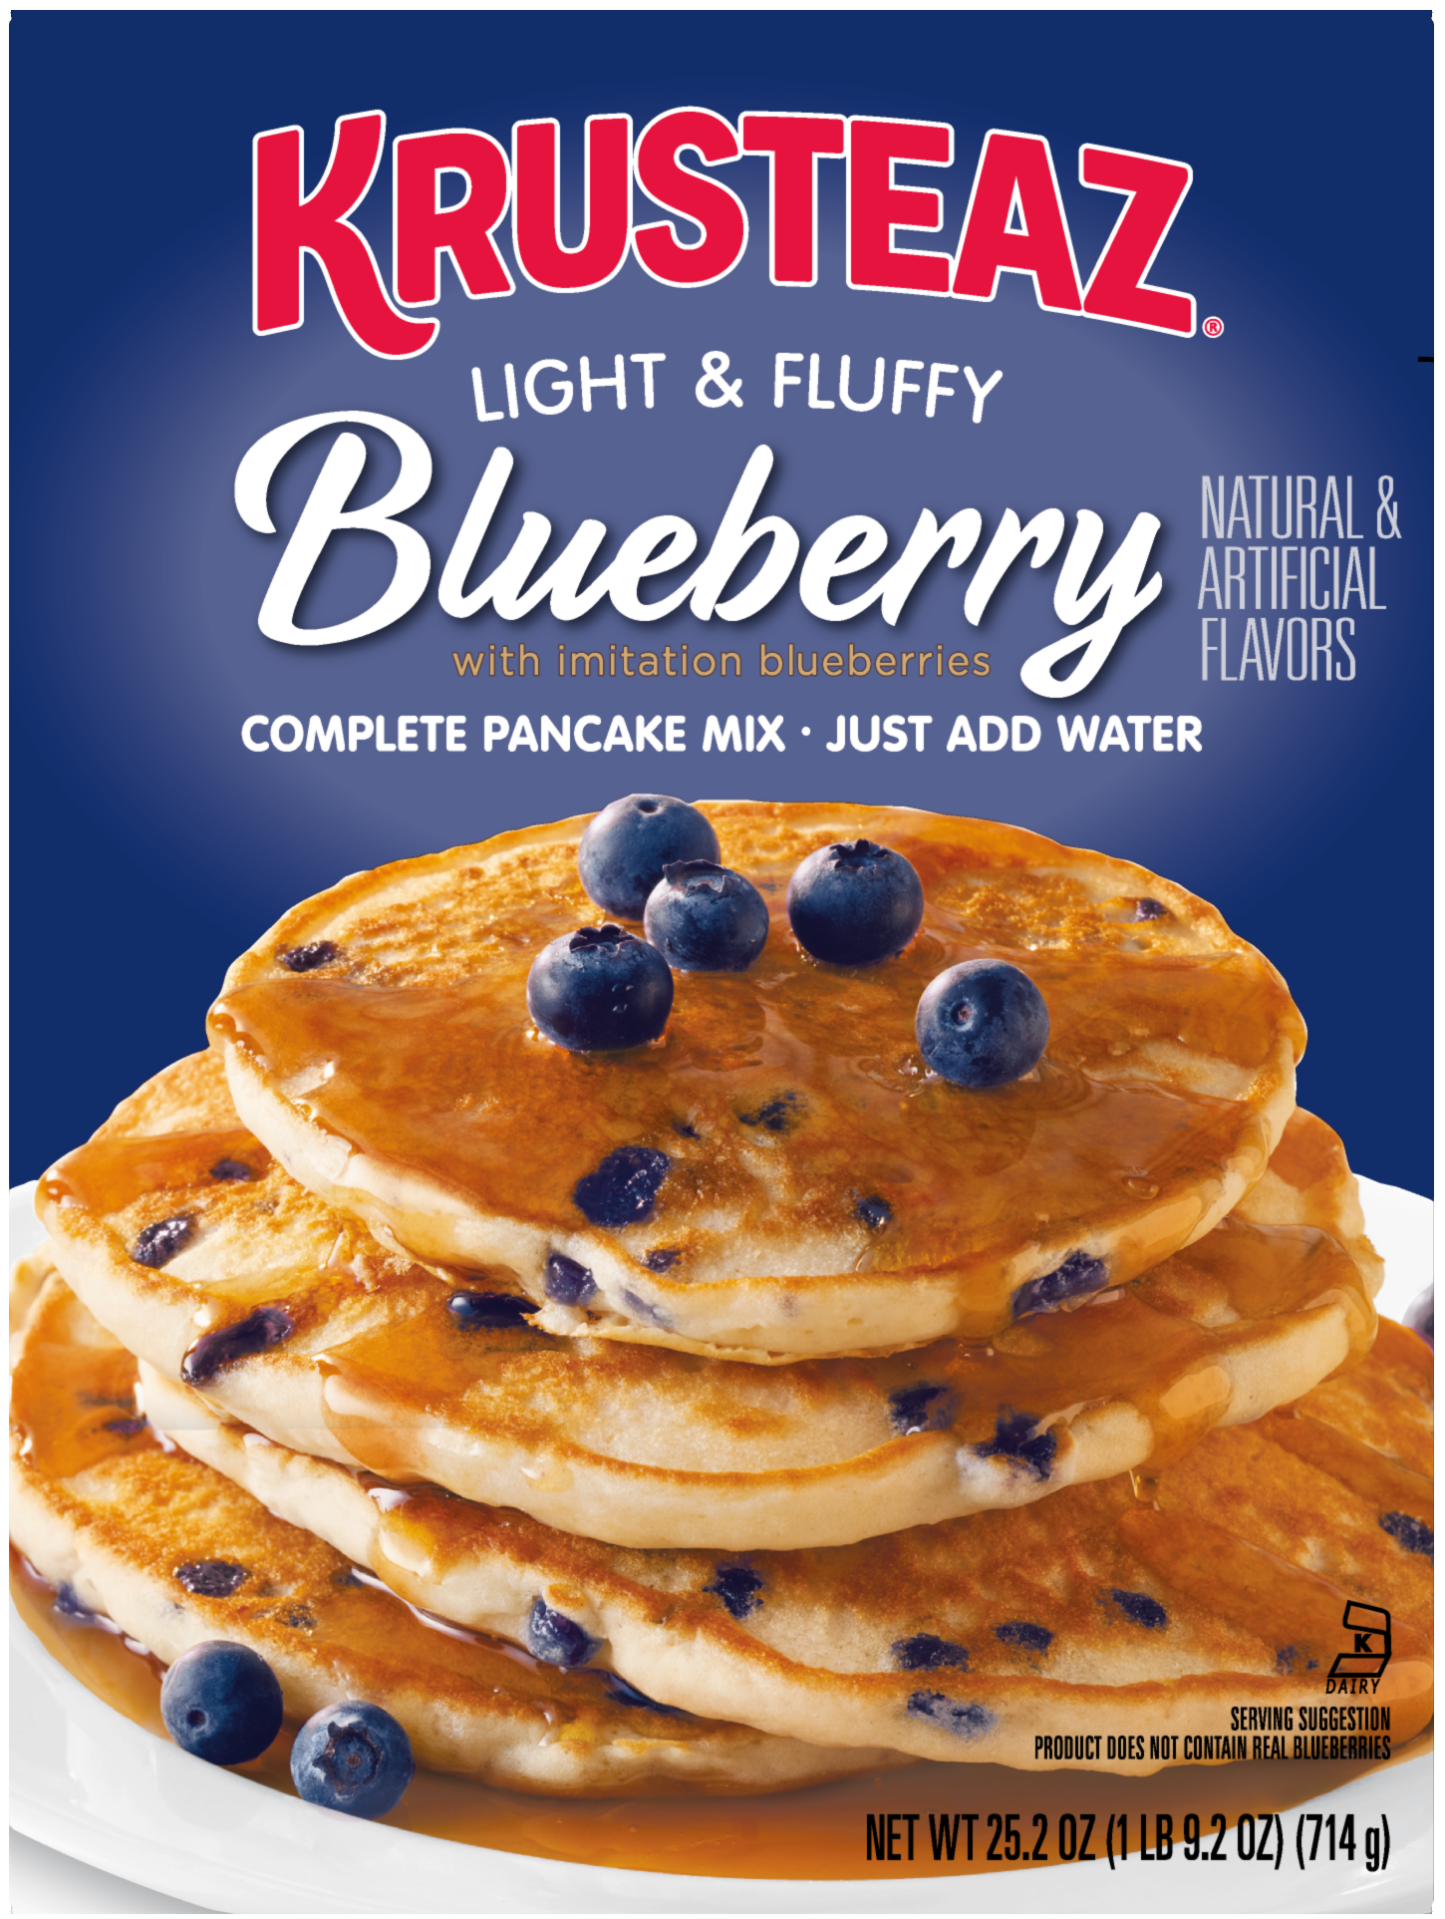 A box of Krusteaz Light and Fluffy Blueberry Complete Pancake Mix.